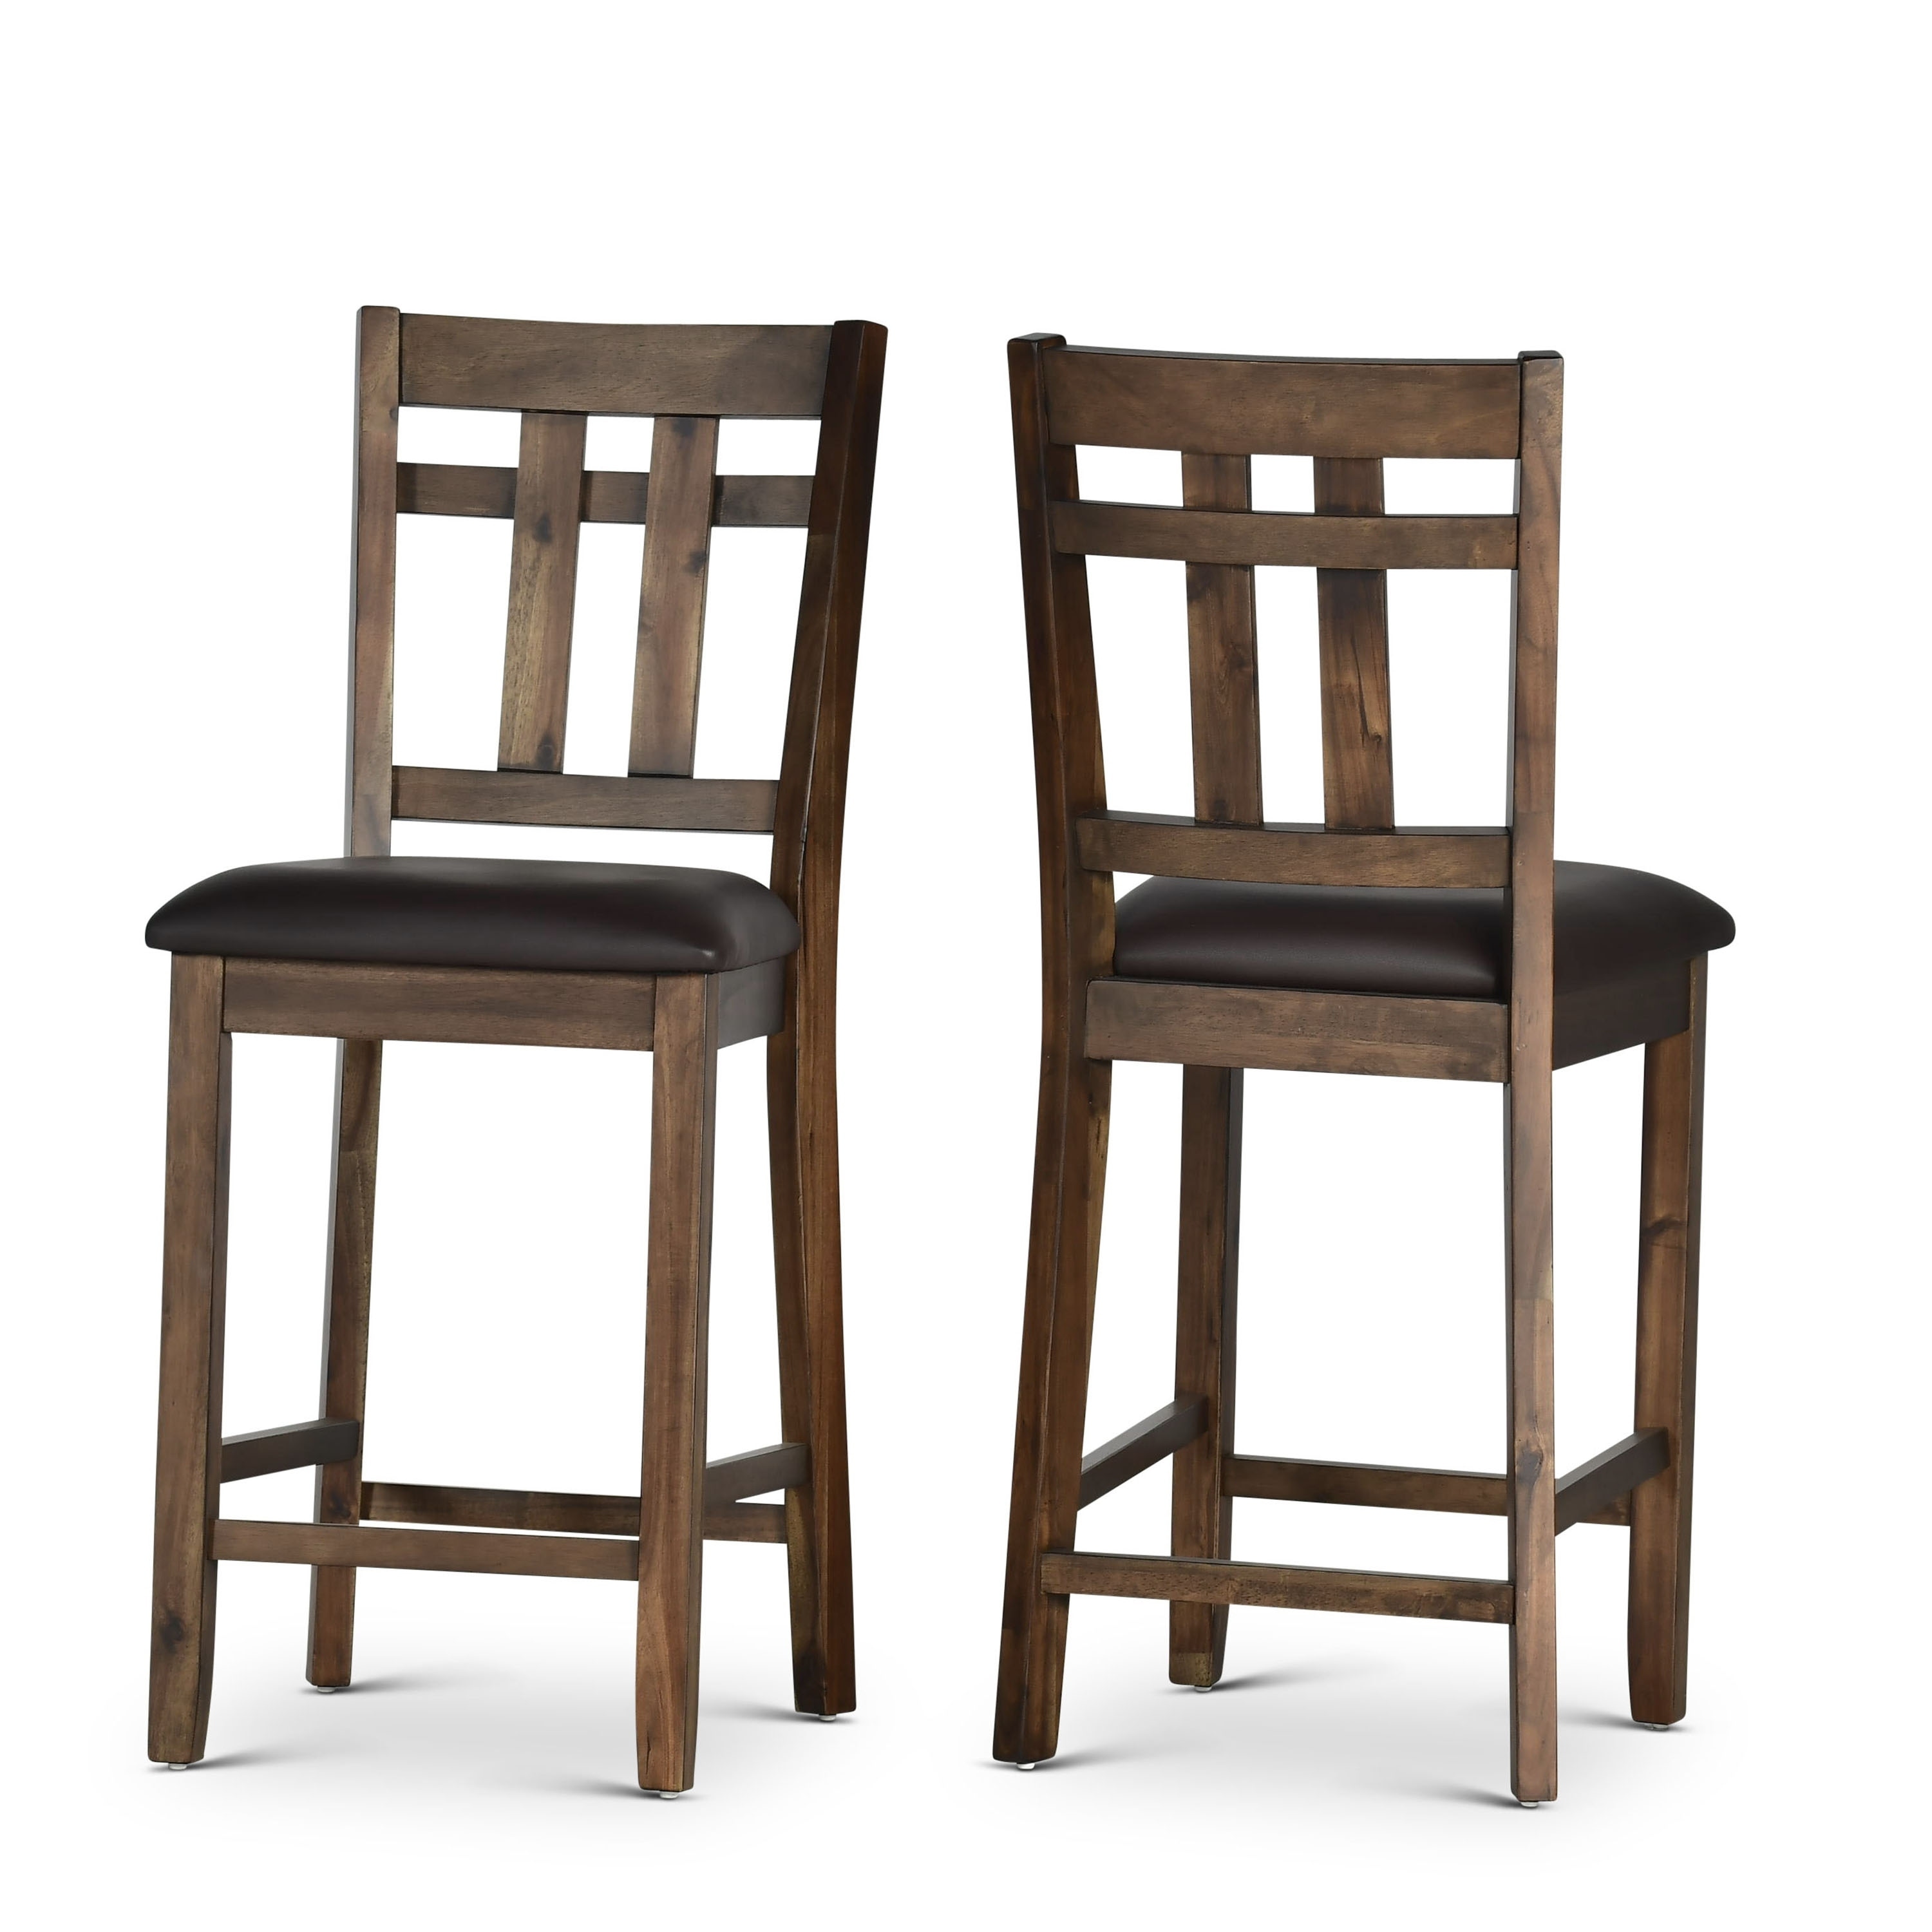 Set Of 2 Counter Height High Chair 24 H Acacia Wood Black Faux Leather Seat Back Home Garden Furniture Home Garden